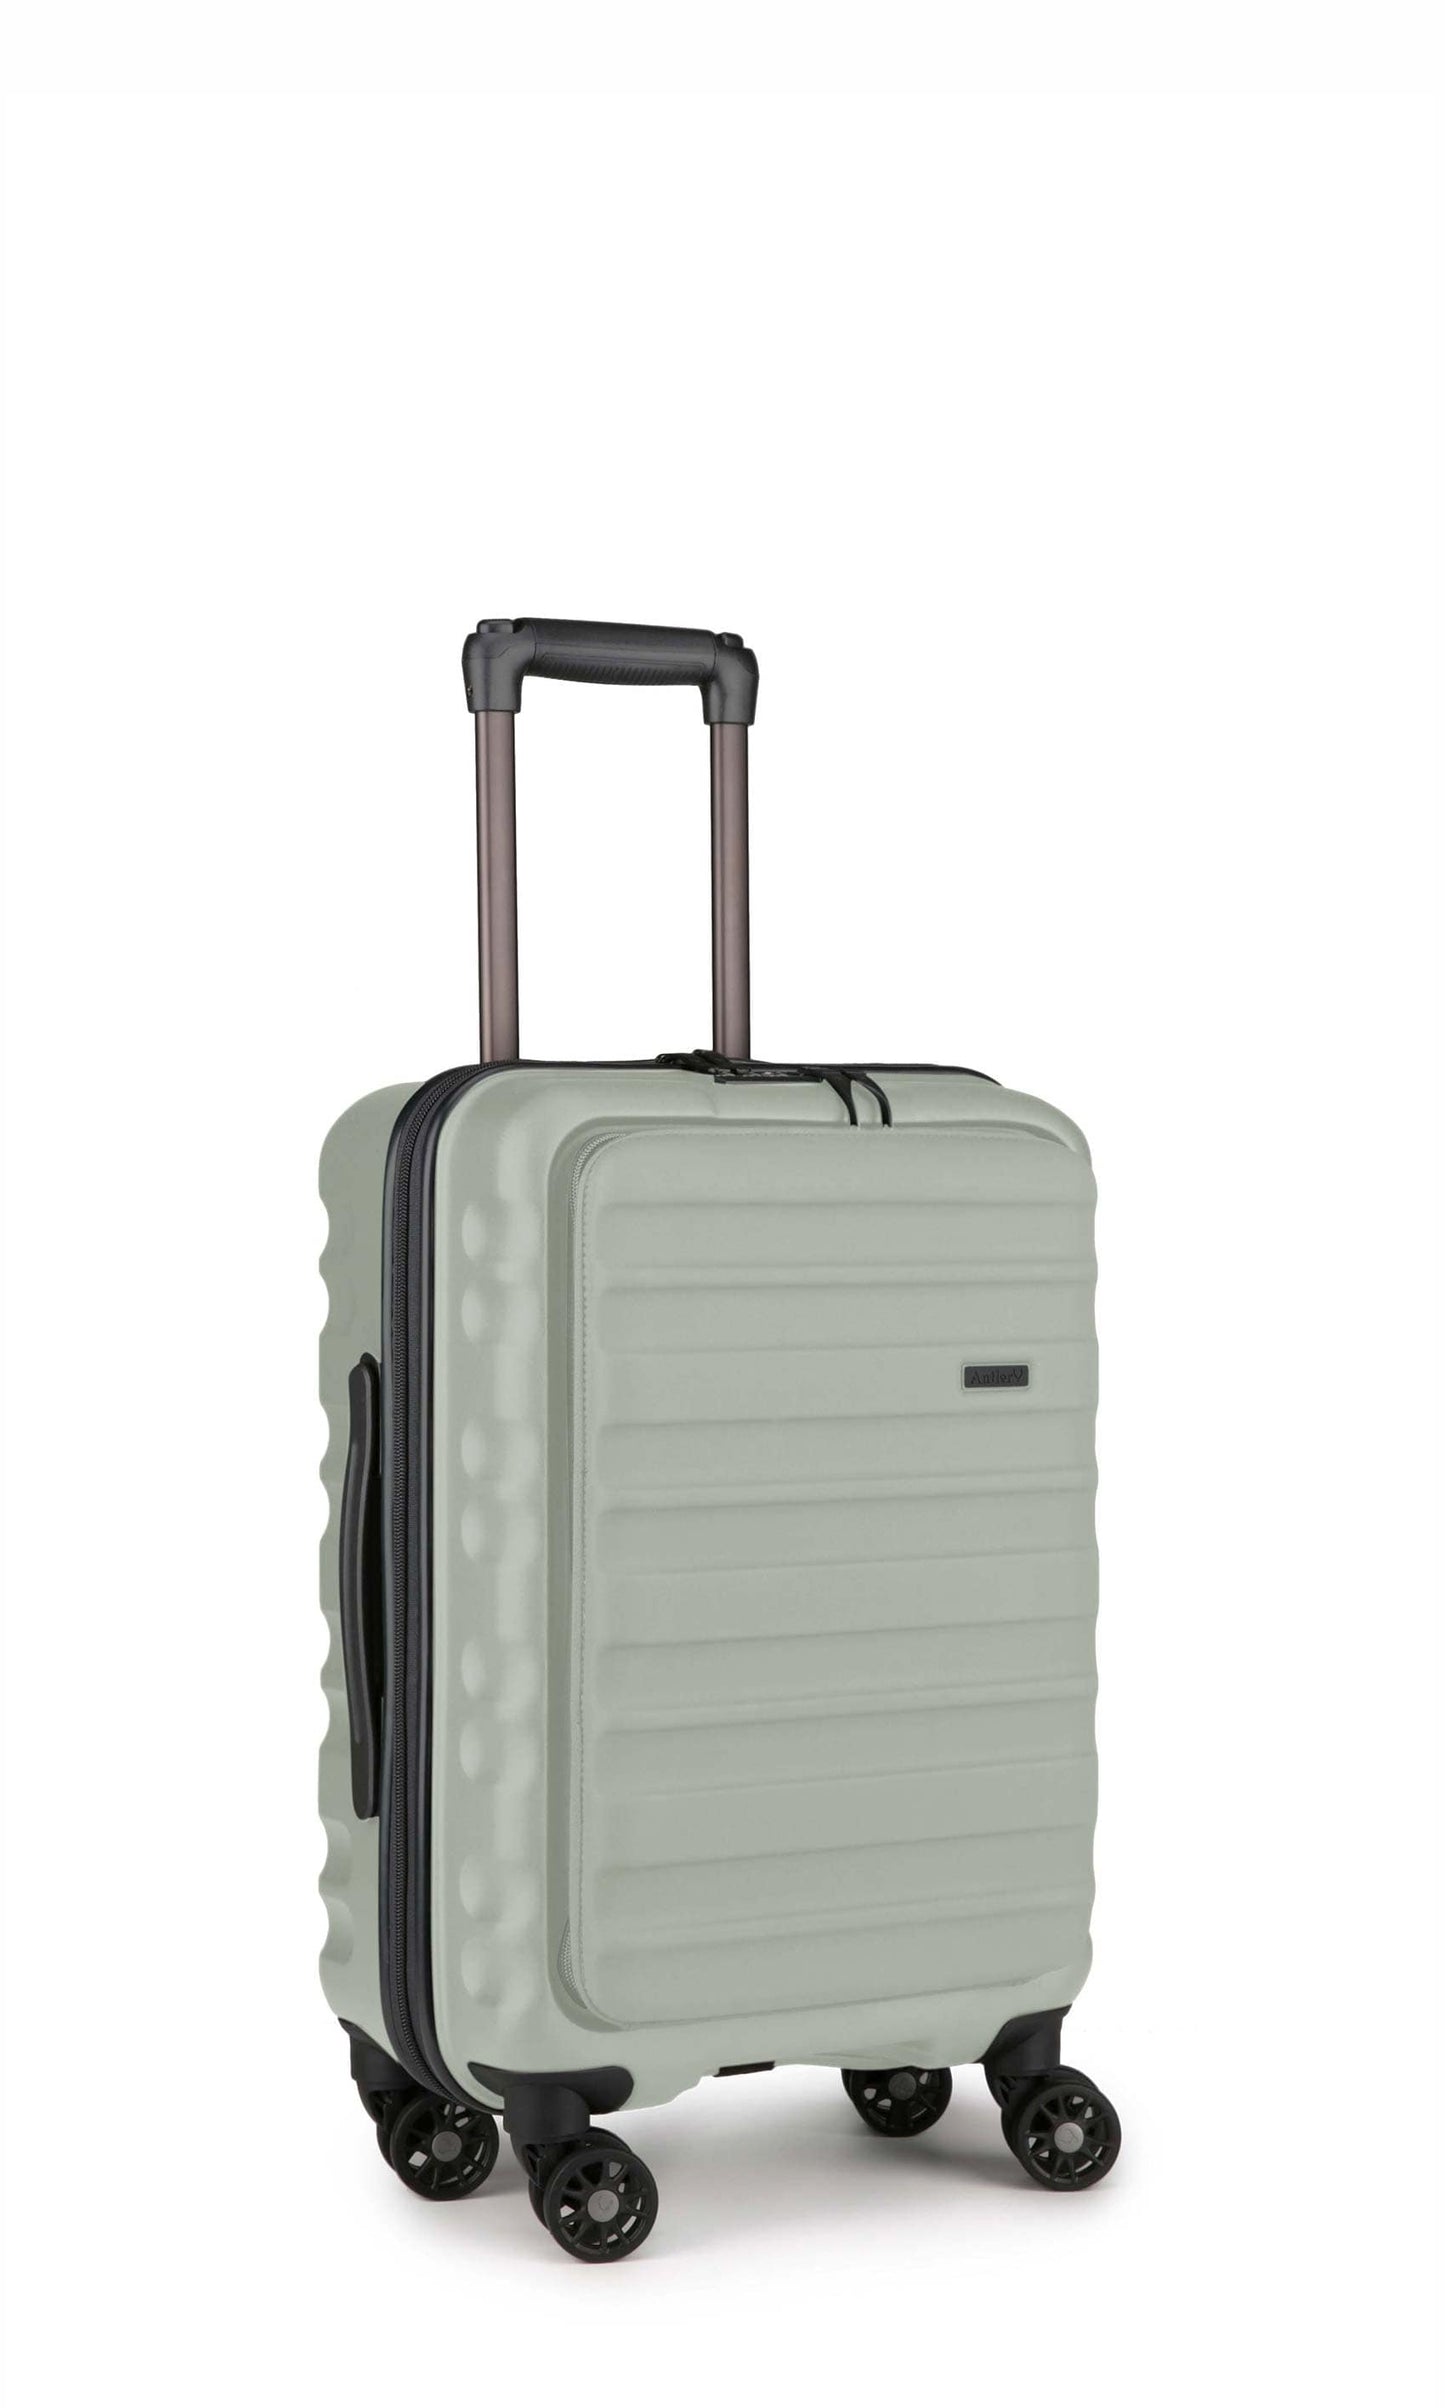 Antler Luggage -  Clifton cabin with pocket in sage - Hard Suitcases Clifton Cabin Pocket Suitcase Sage | Hard Suitcase | Antler UK